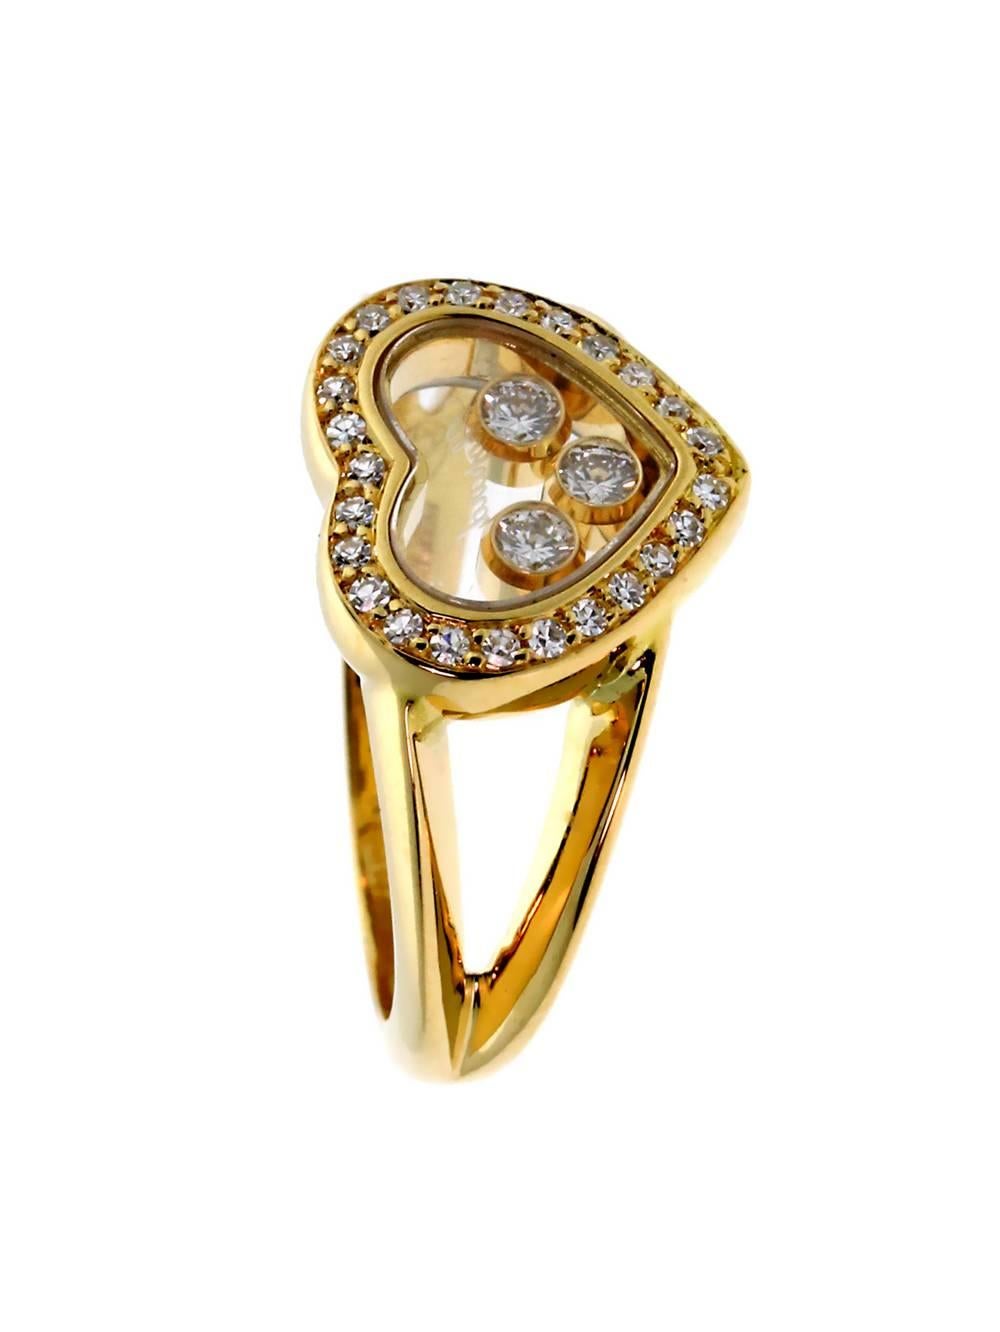 A stunning authentic Chopard happy diamond ring crafted in 18k yellow gold adorned with 28 Round Brilliant Cut VS1 Clarity F-G Color .27Ct.

The ring measures (.43″ Inches) and is a size 4 1/2 (Resizeable)

Inventory ID: 0000257